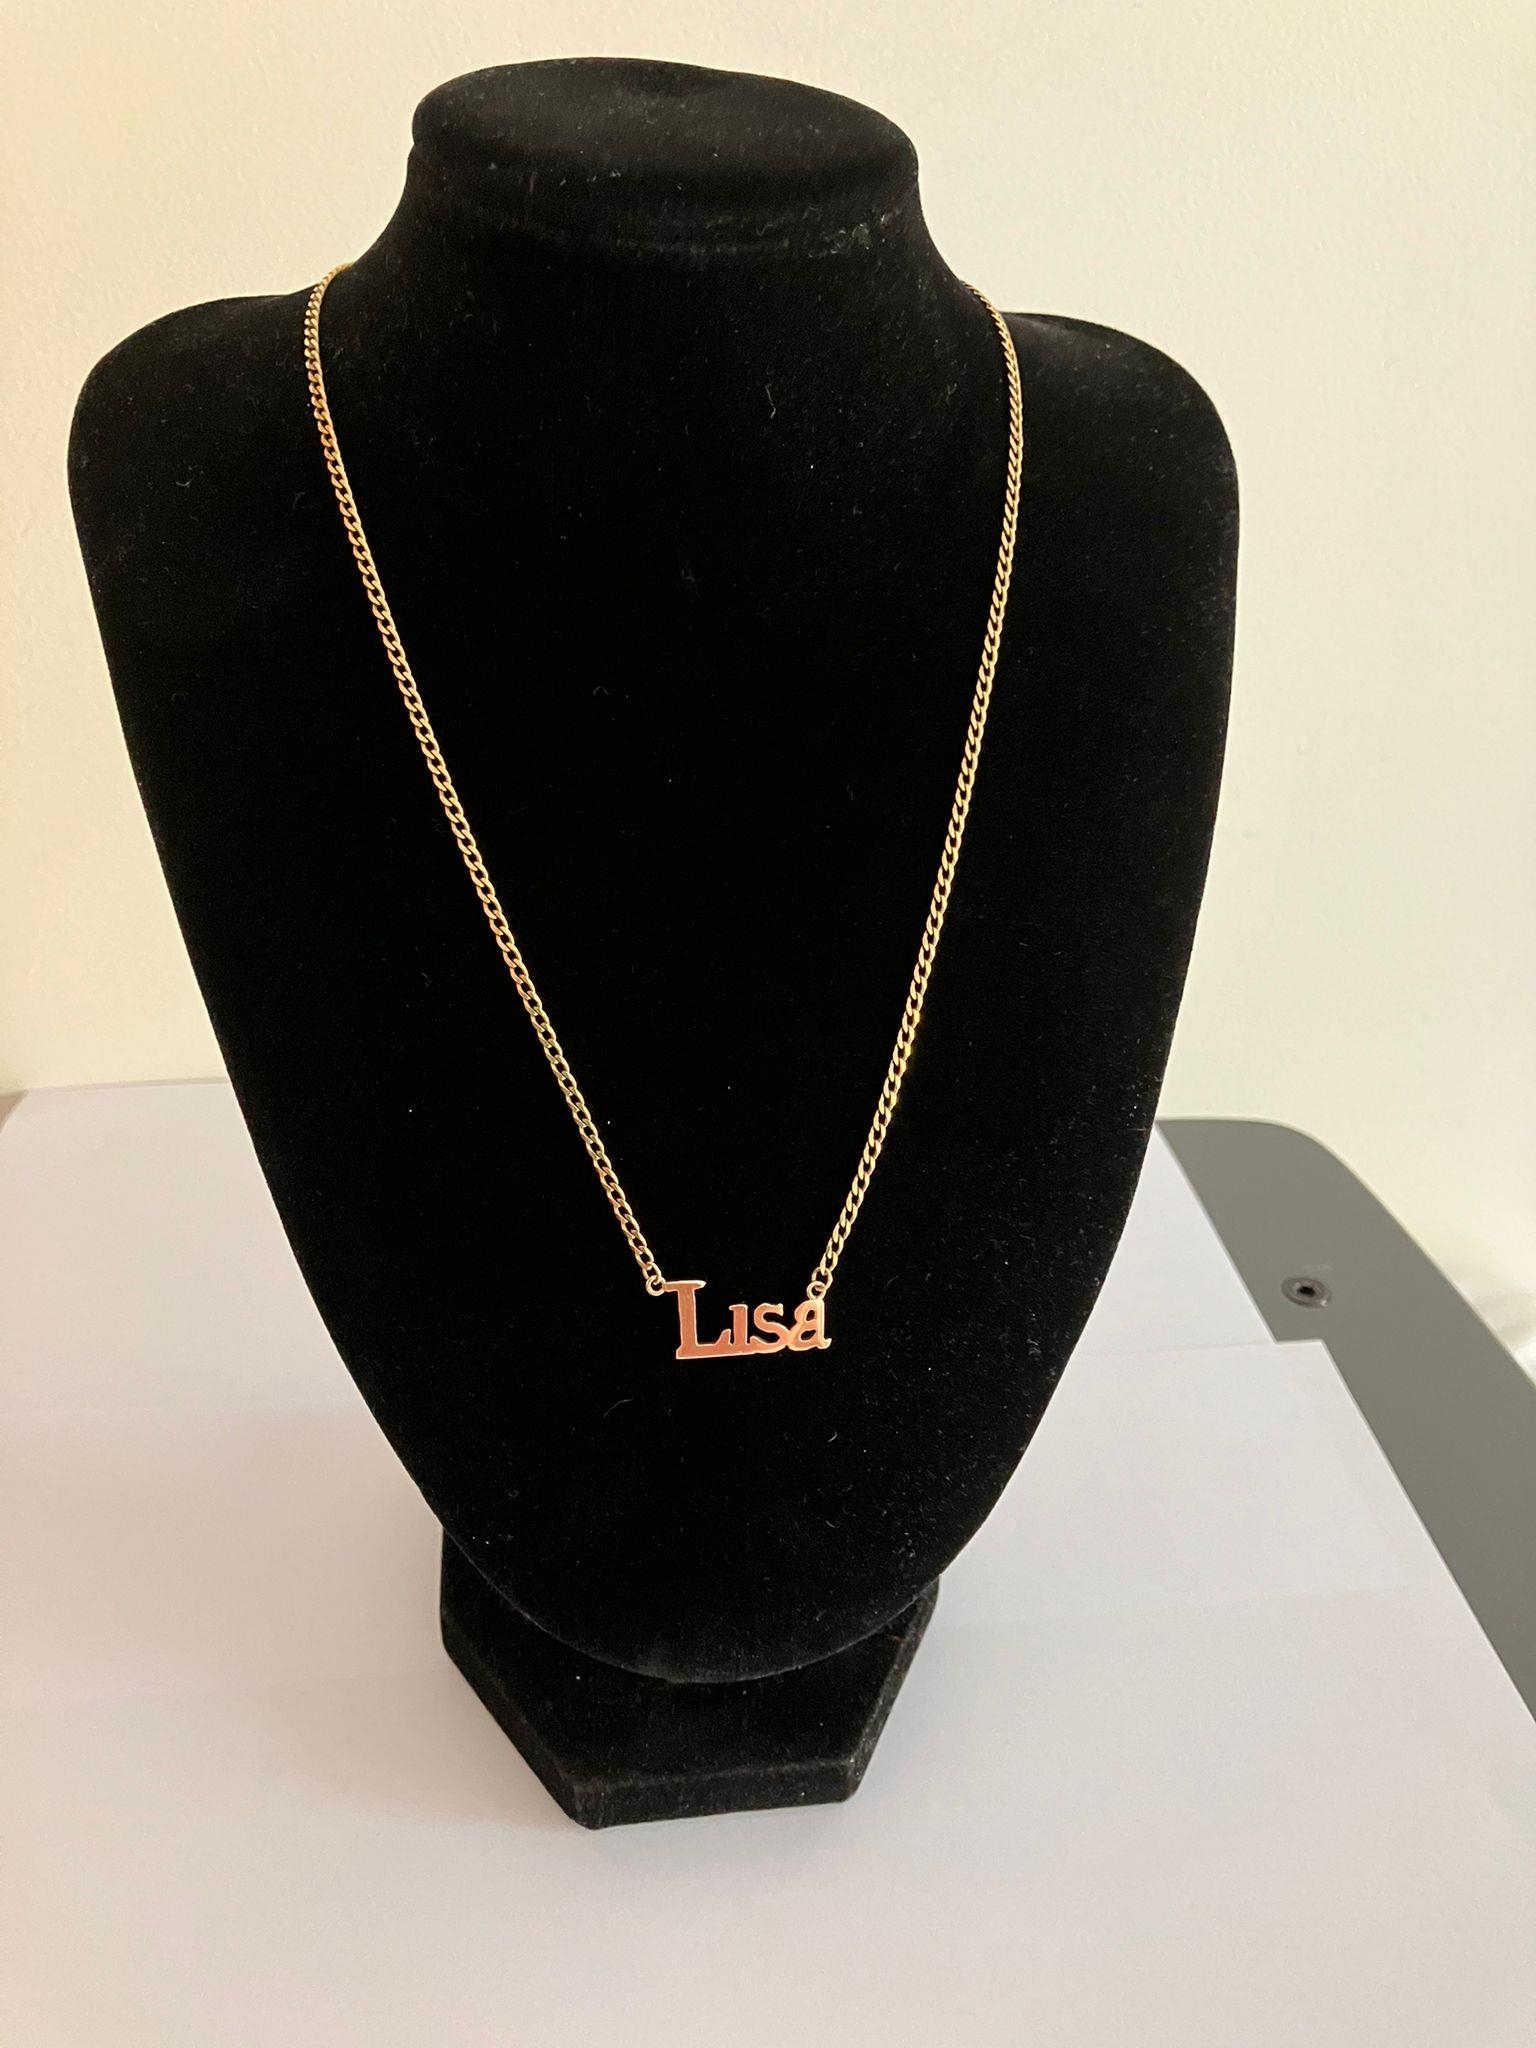 9 carat GOLD, CURB CHAIN NECKLACE with name of LISA. Full UK hallmark. 5.7 grams. 46 cm. - Image 11 of 11